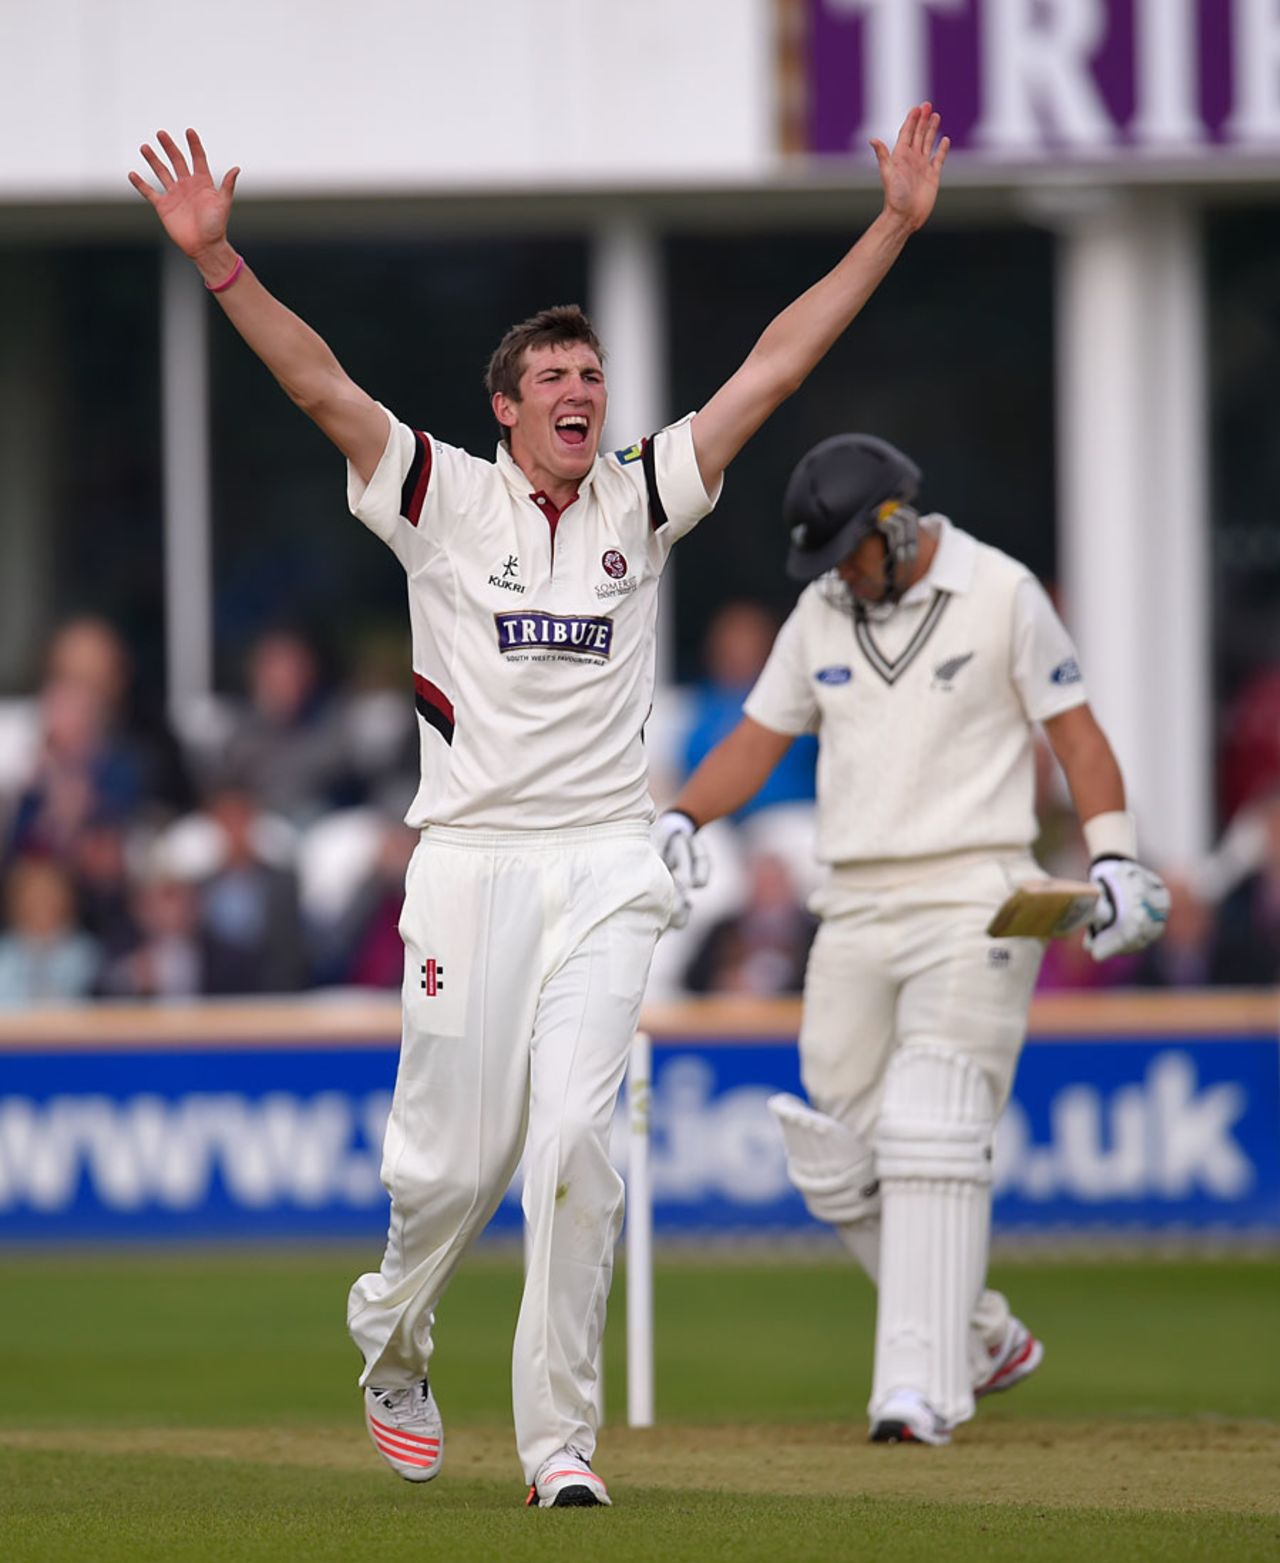 Craig Overton appeals against Ross Taylor, Somerset v New Zealanders, Tour match, 1st day, Taunton, May 8, 2015